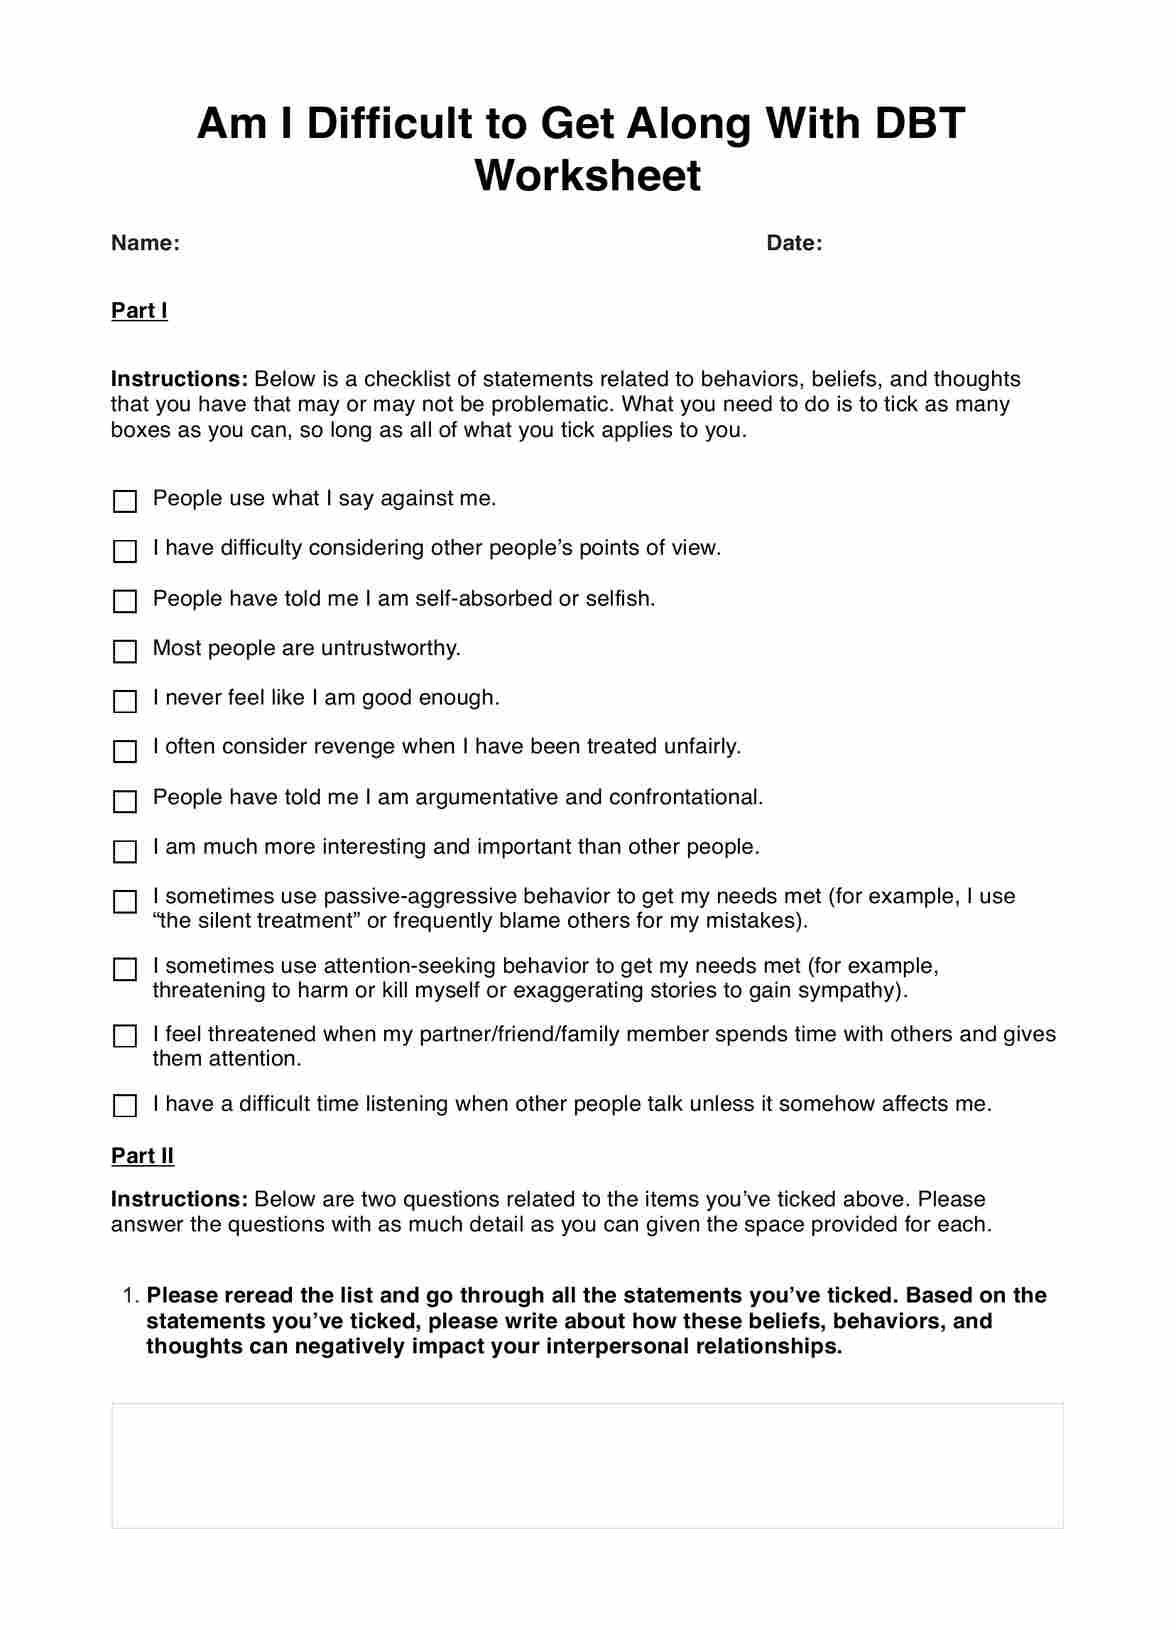 Am I Difficult to Get Along With DBT Worksheet PDF Example